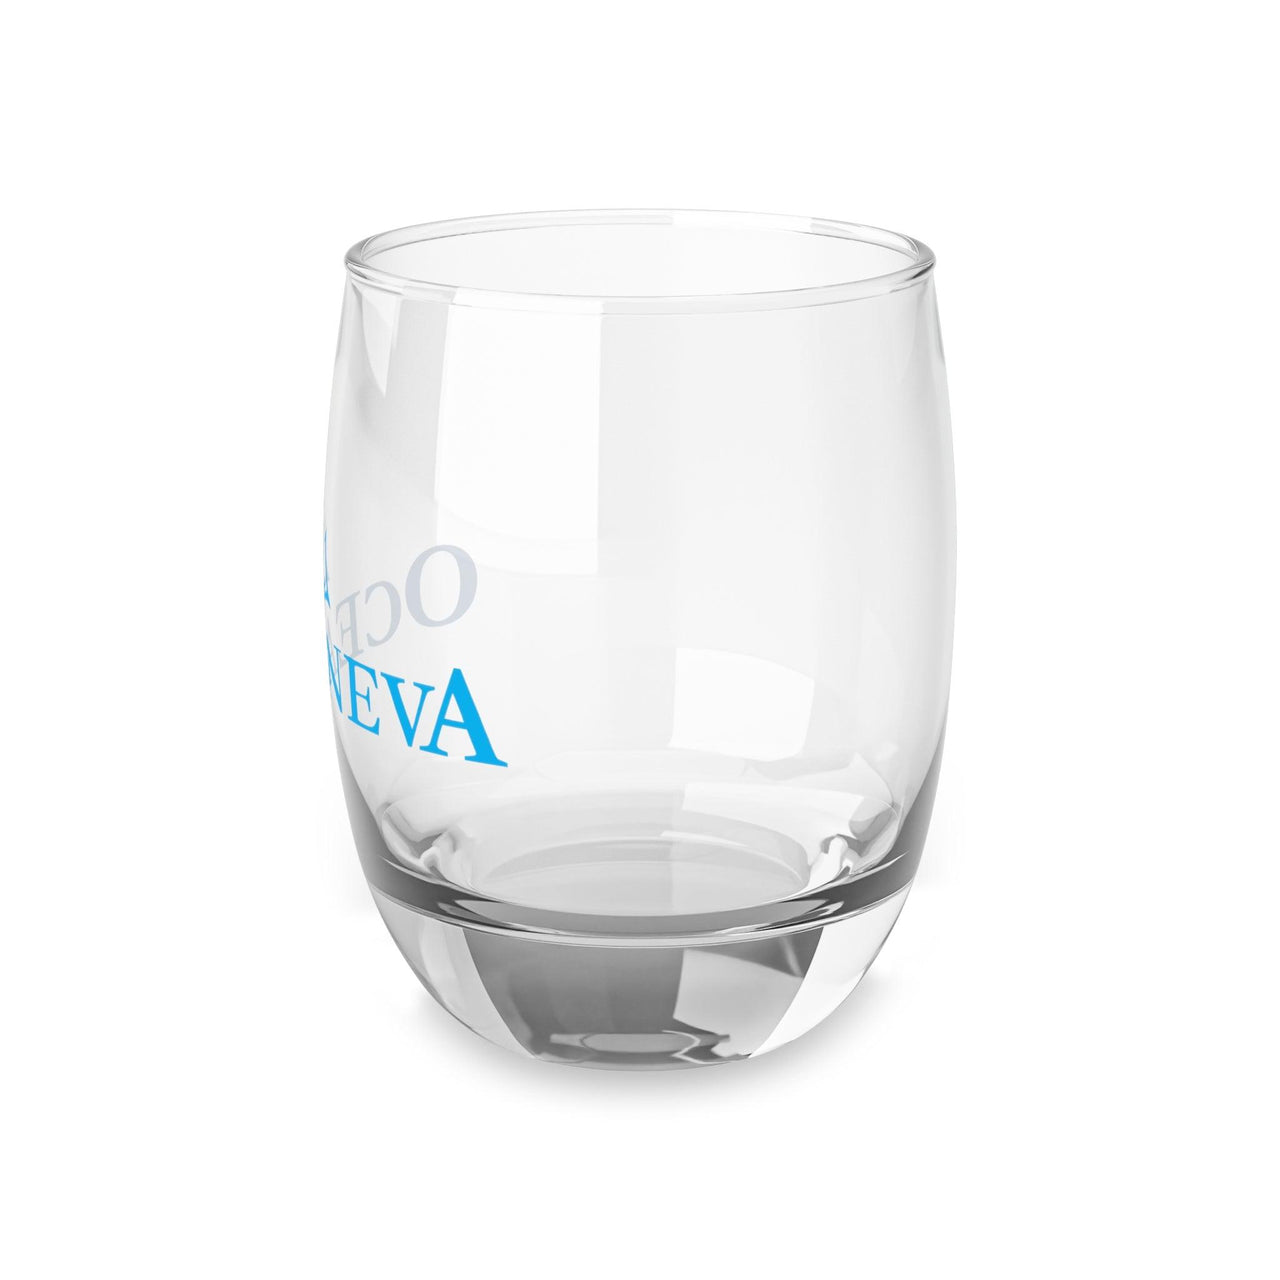 Oceaneva Whiskey Glass - 31234513002107062171 Assembled in the USA, Assembled in USA, Beverage, Drink, Drinks, Glass, Glassware, Home & Living, Made in the USA, Made in USA